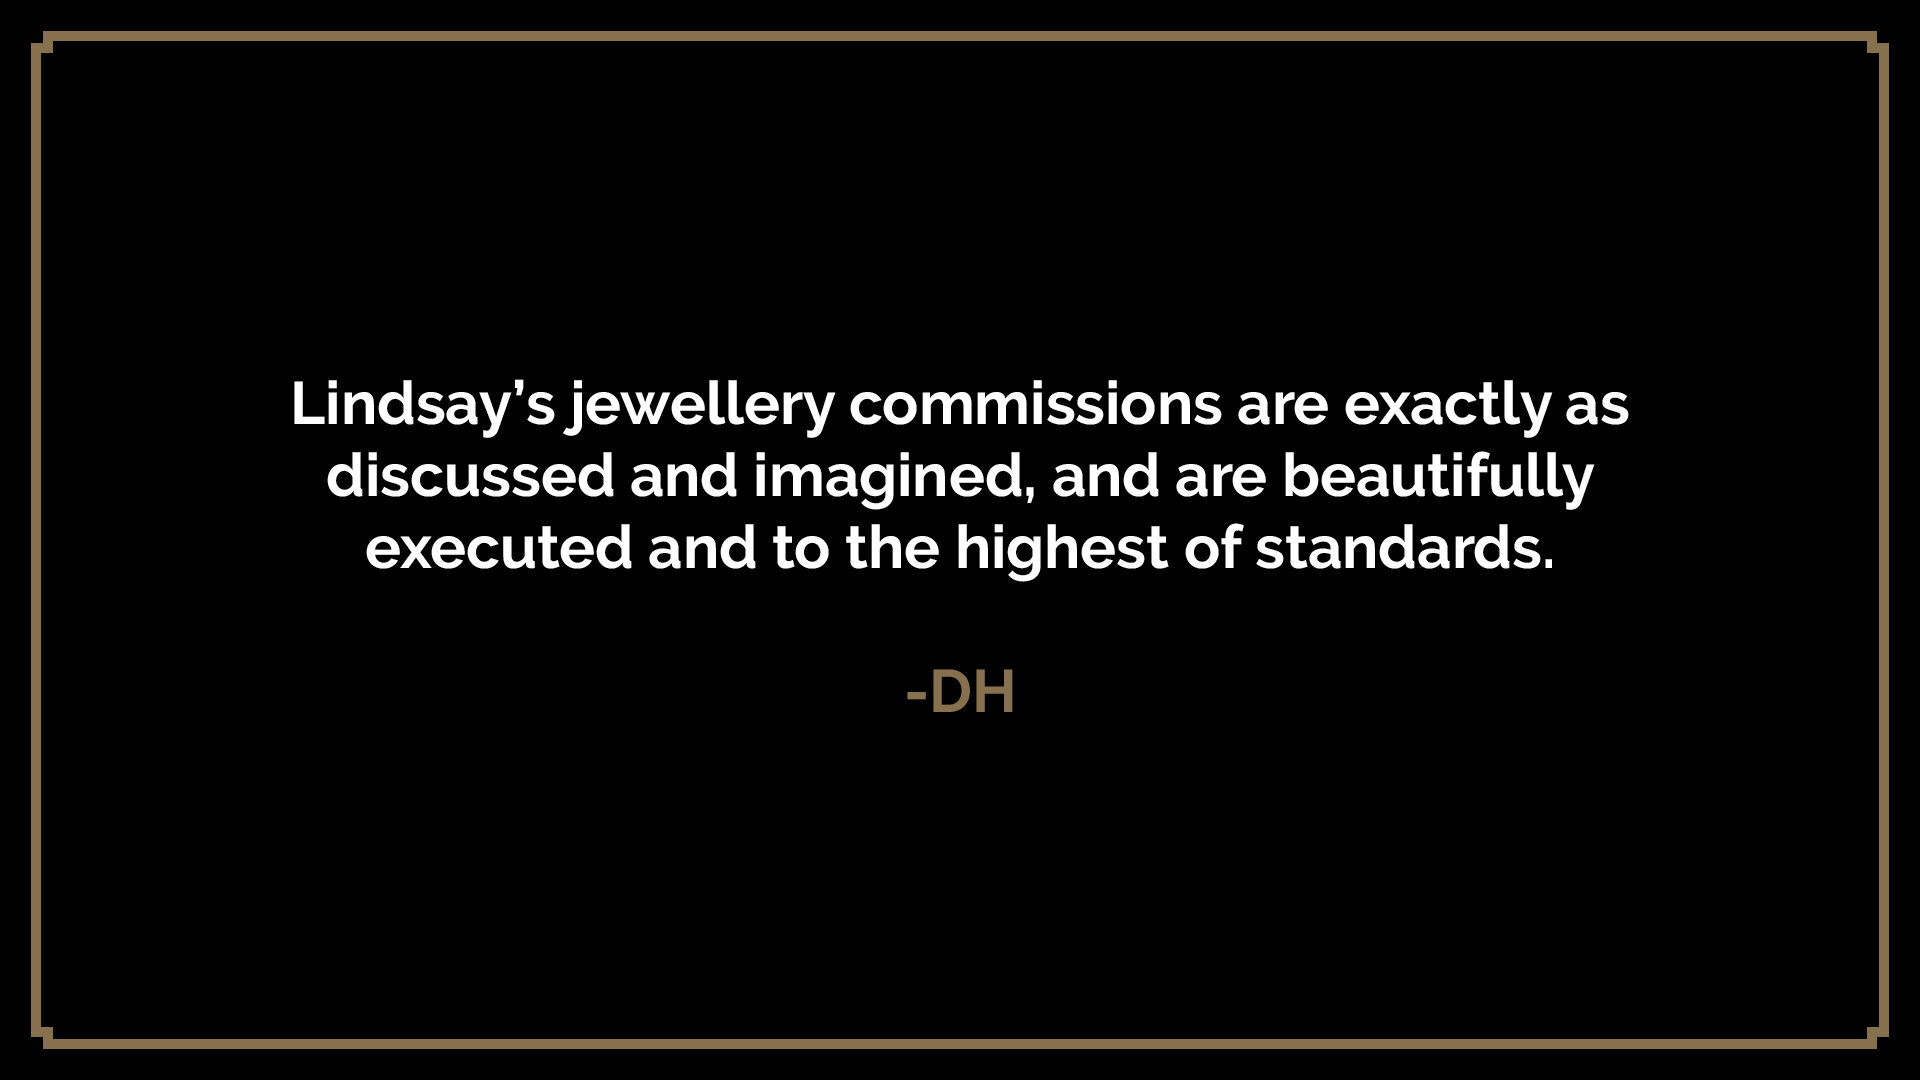  Lindsay’s jewellery commissions are exactly as discussed and imagined, and are beautifully executed and to the highest of standards.  -DH 